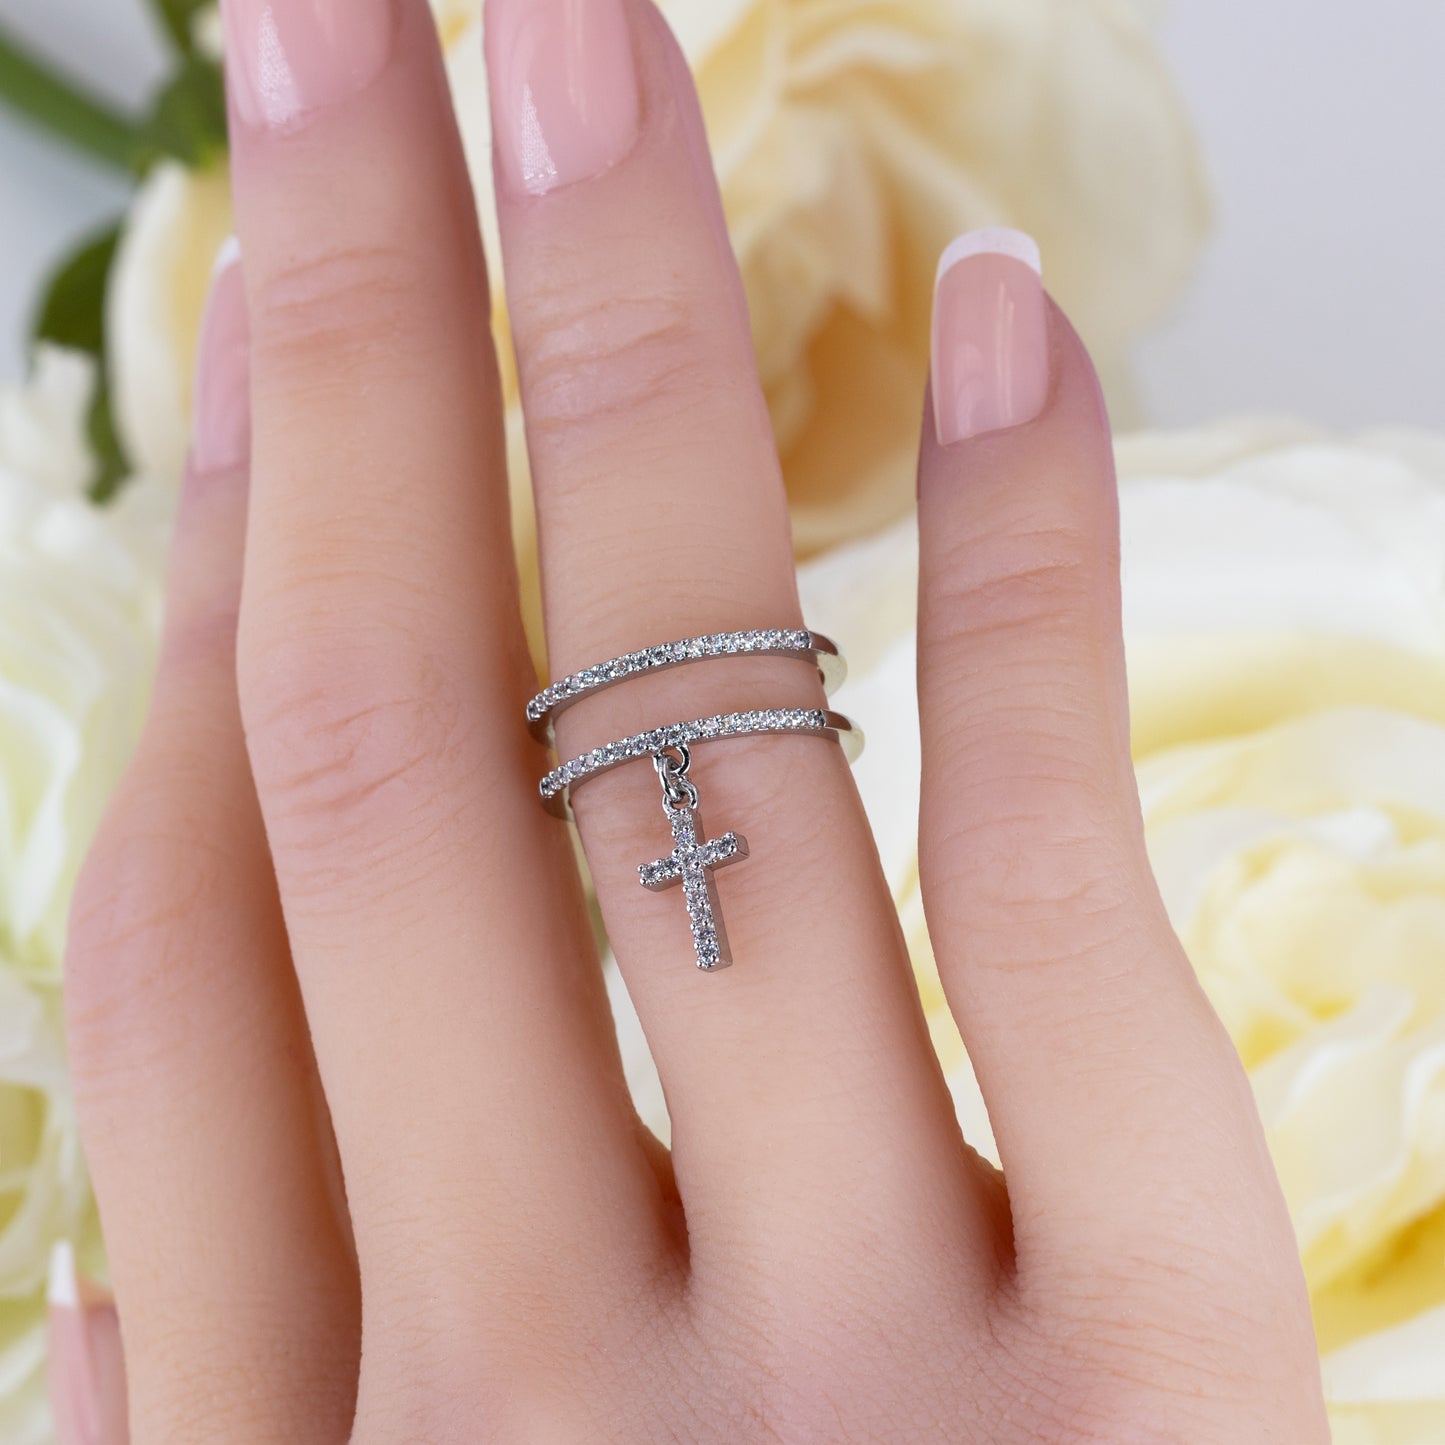 Dangle Ring With Cross Charm For Women